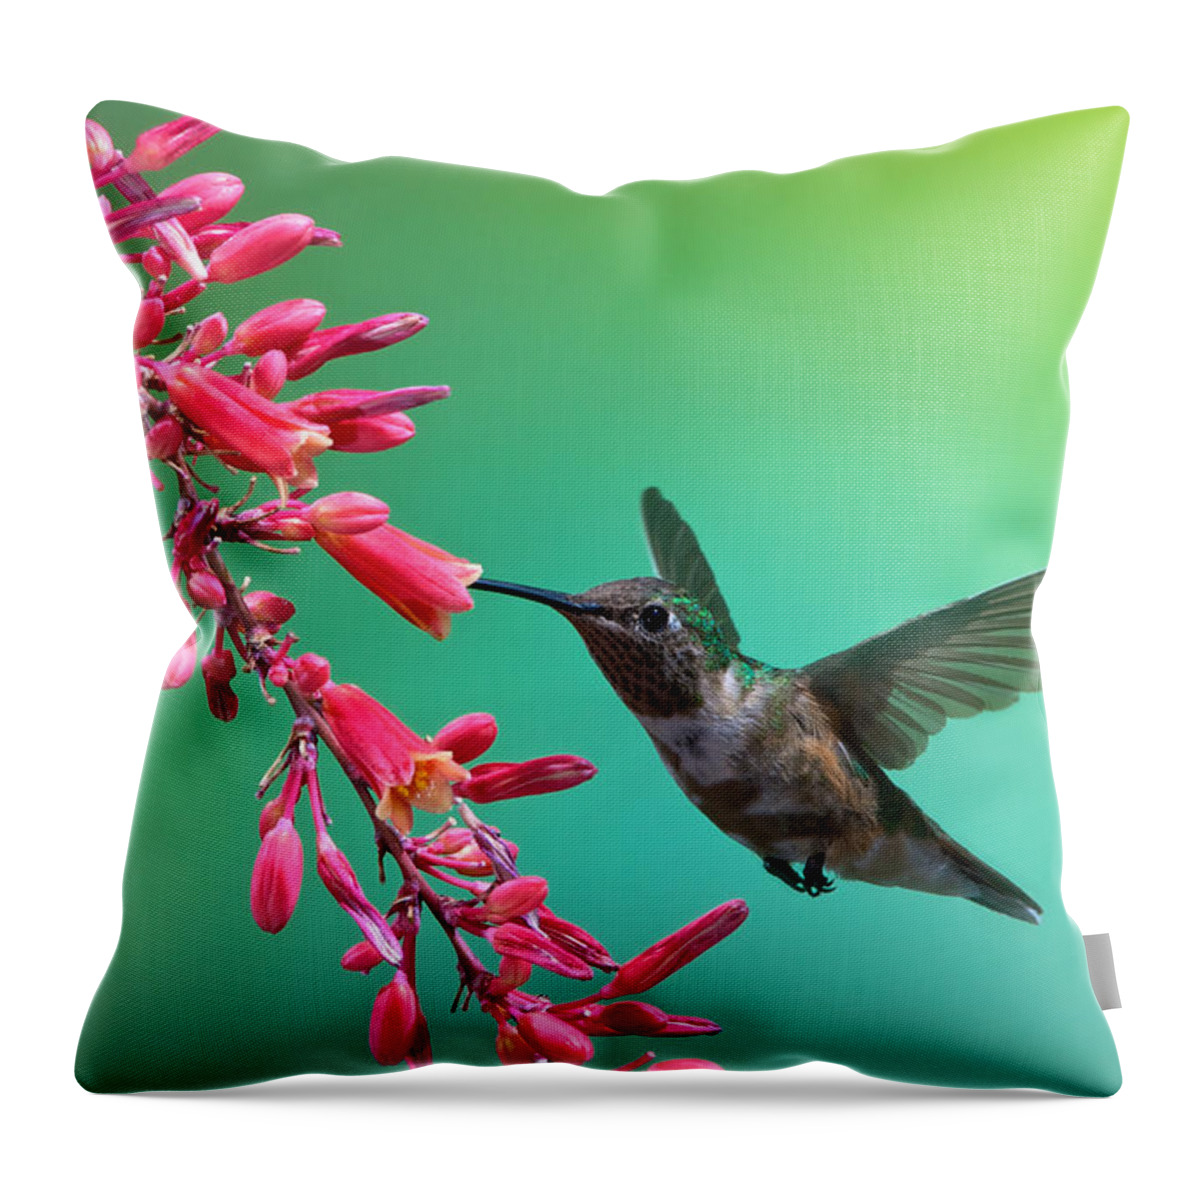 Archilochus Alexandri Throw Pillow featuring the photograph Black Chinned Hummingbird by Mary Lee Dereske